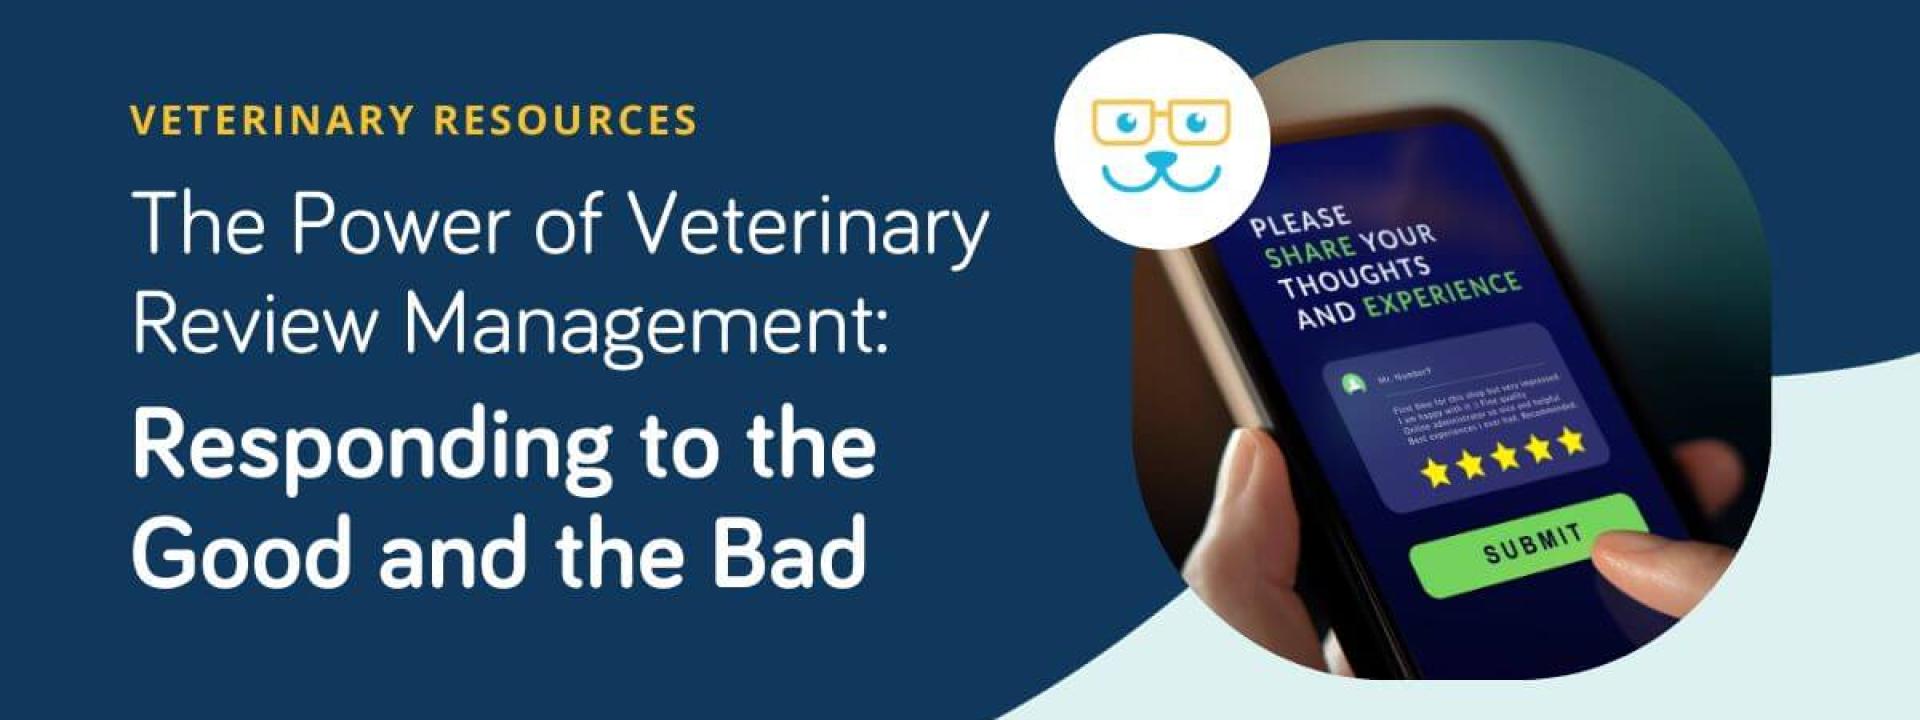 Responding to reviews is essential for your veterinary marketing strategy.